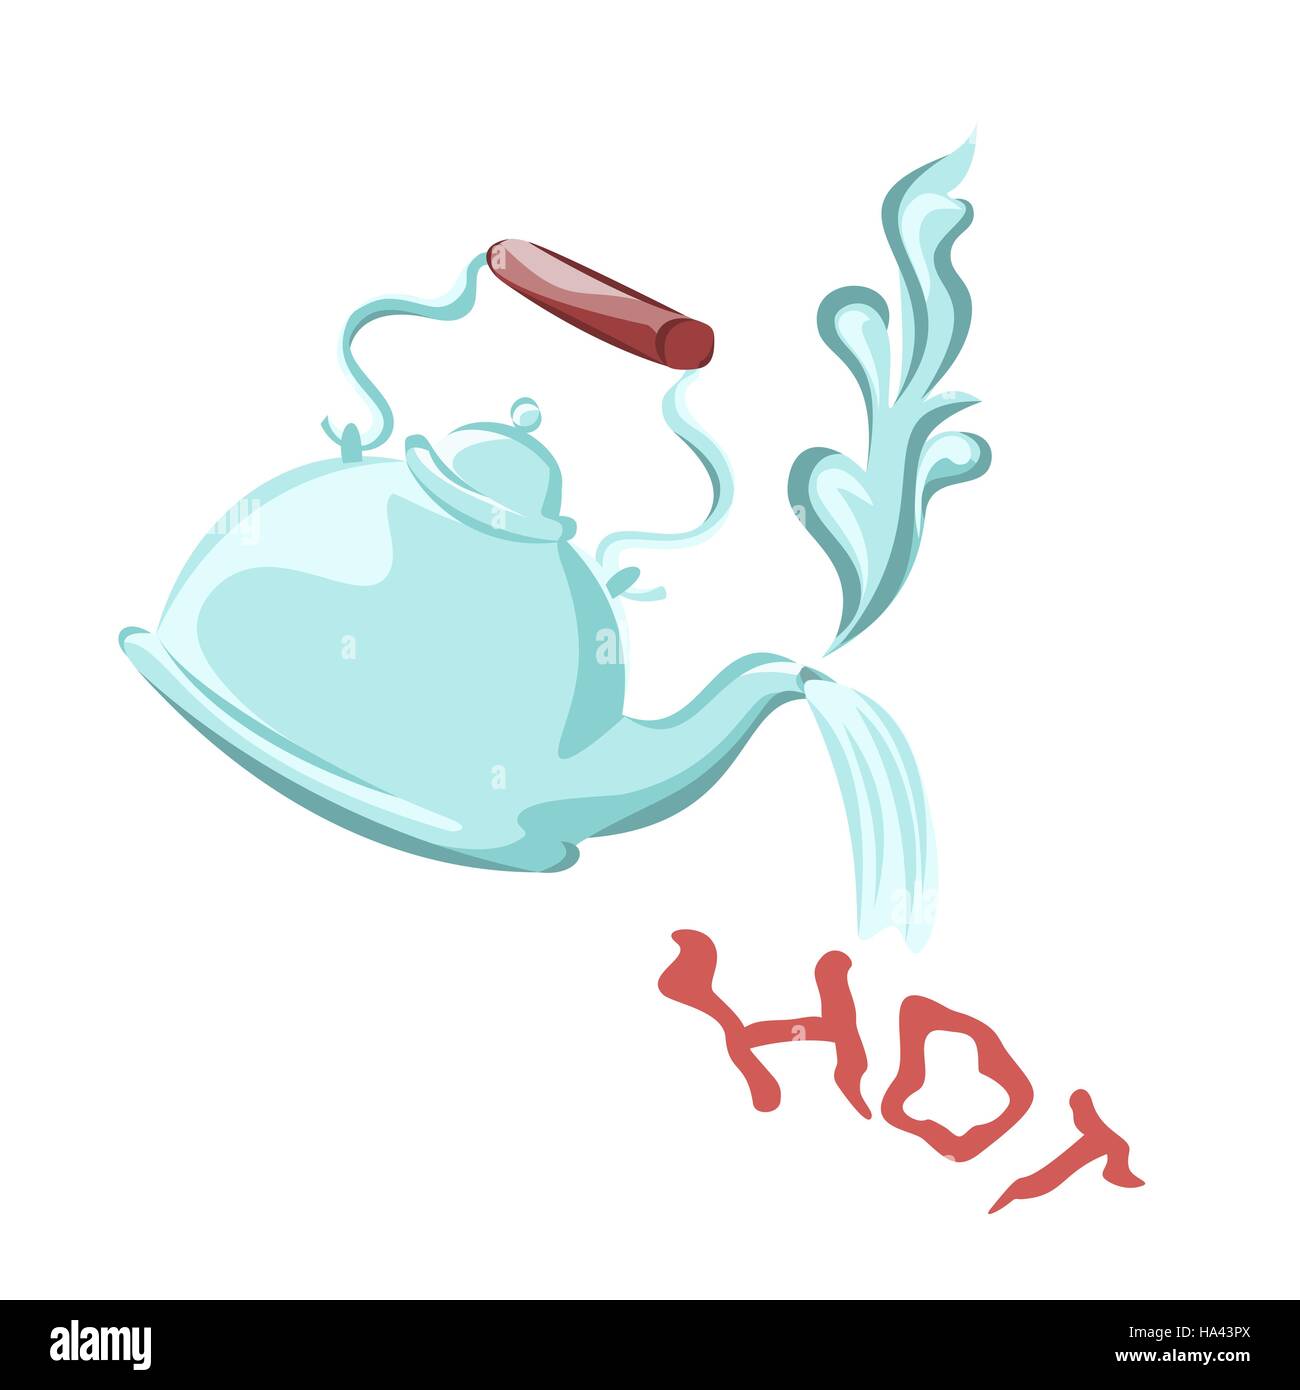 https://c8.alamy.com/comp/HA43PX/kettle-boil-with-boiling-water-jet-forms-a-word-hot-vector-illustration-HA43PX.jpg